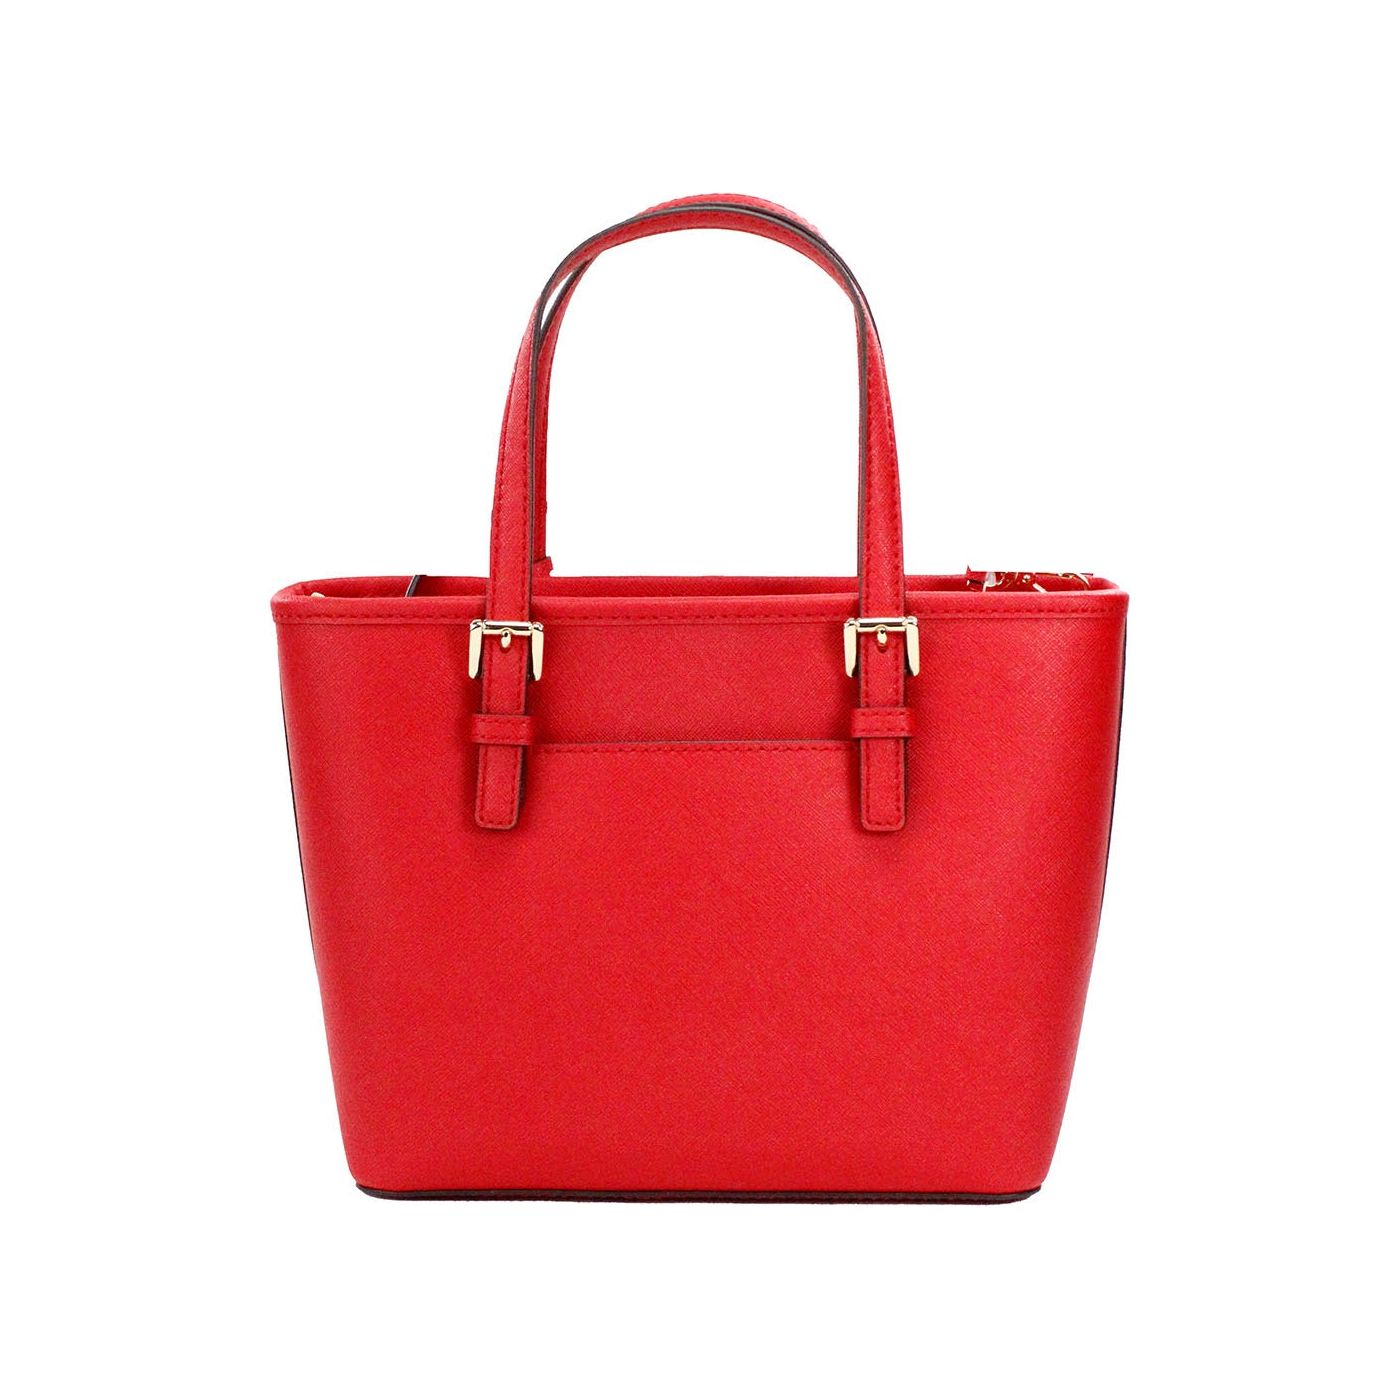 Michael Kors Jet Set Bright Red Leather XS Carryall Top Zip Tote Bag Purse jet-set-bright-red-leather-xs-carryall-top-zip-tote-bag-purse